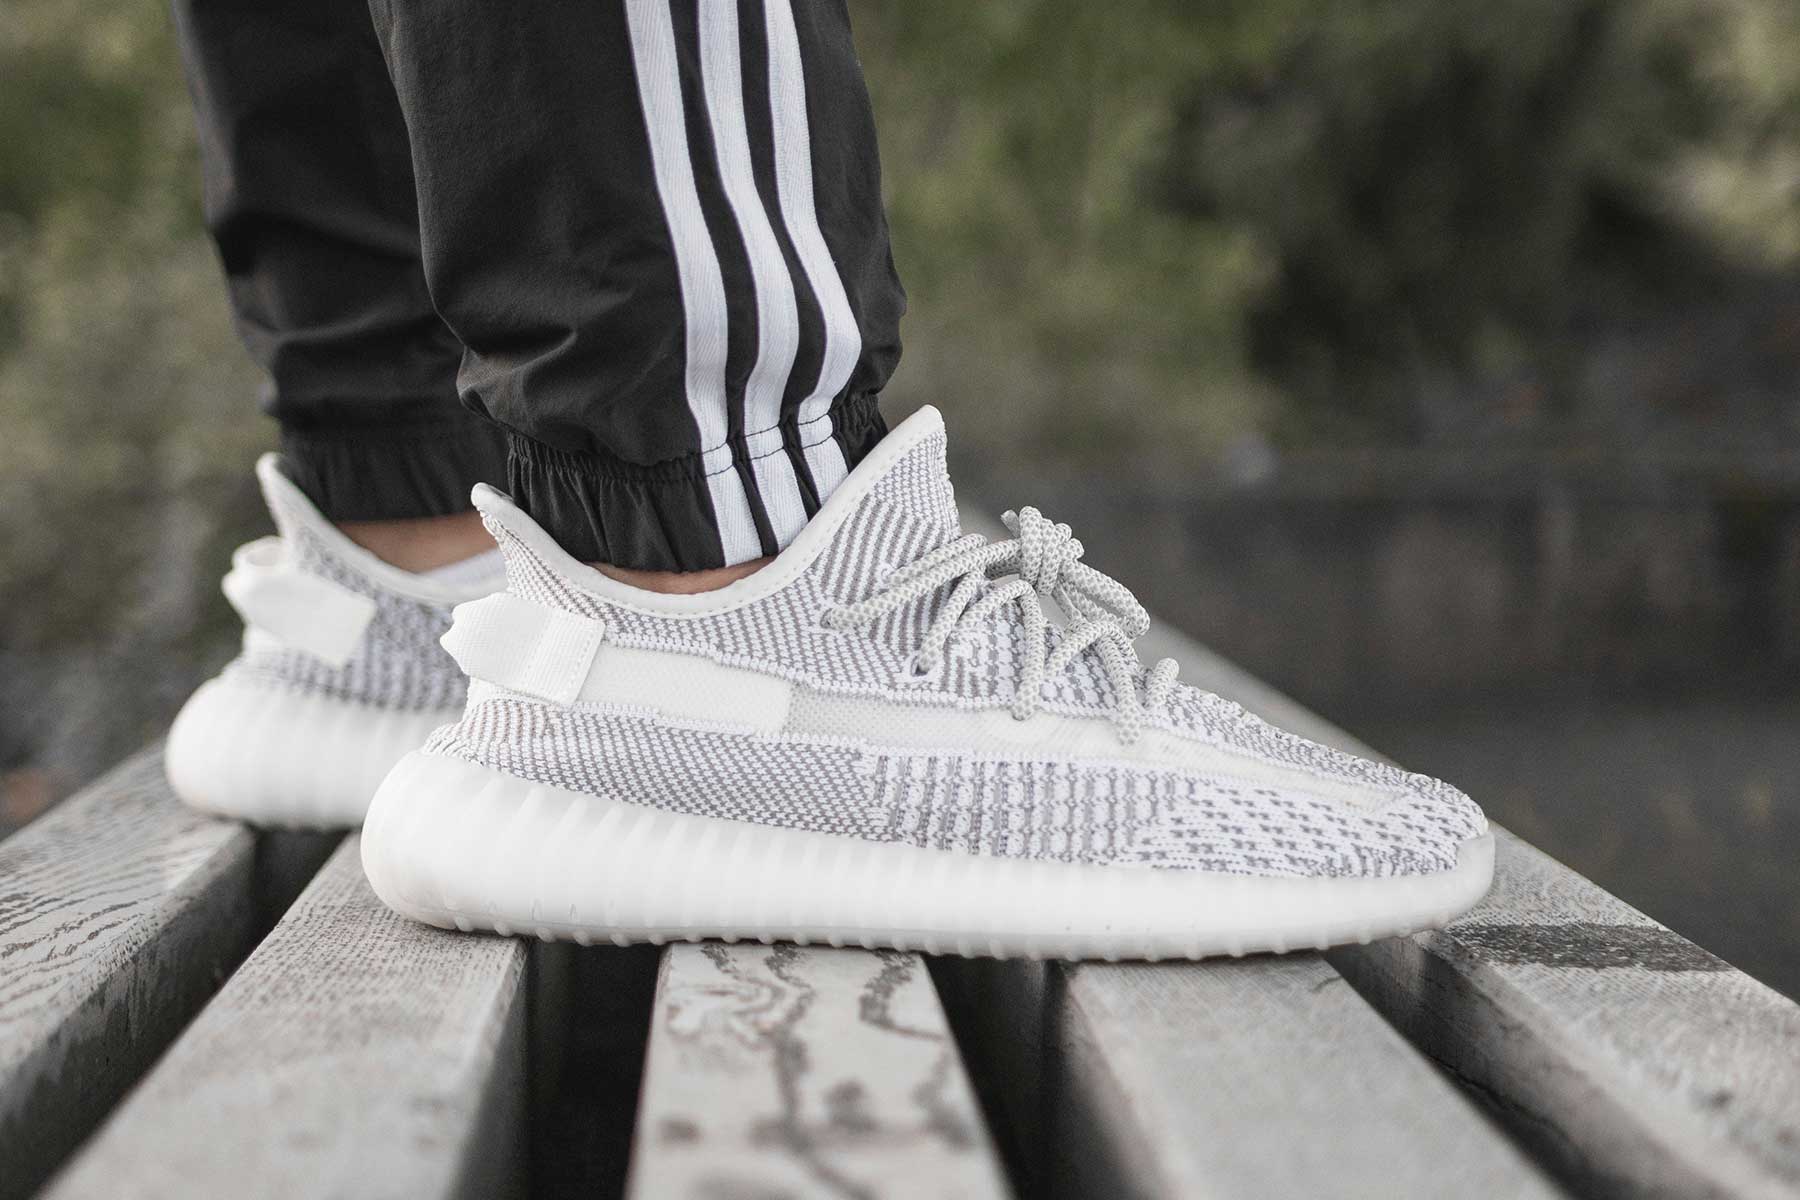 Adidas has finally decided what to do with its Yeezy stock